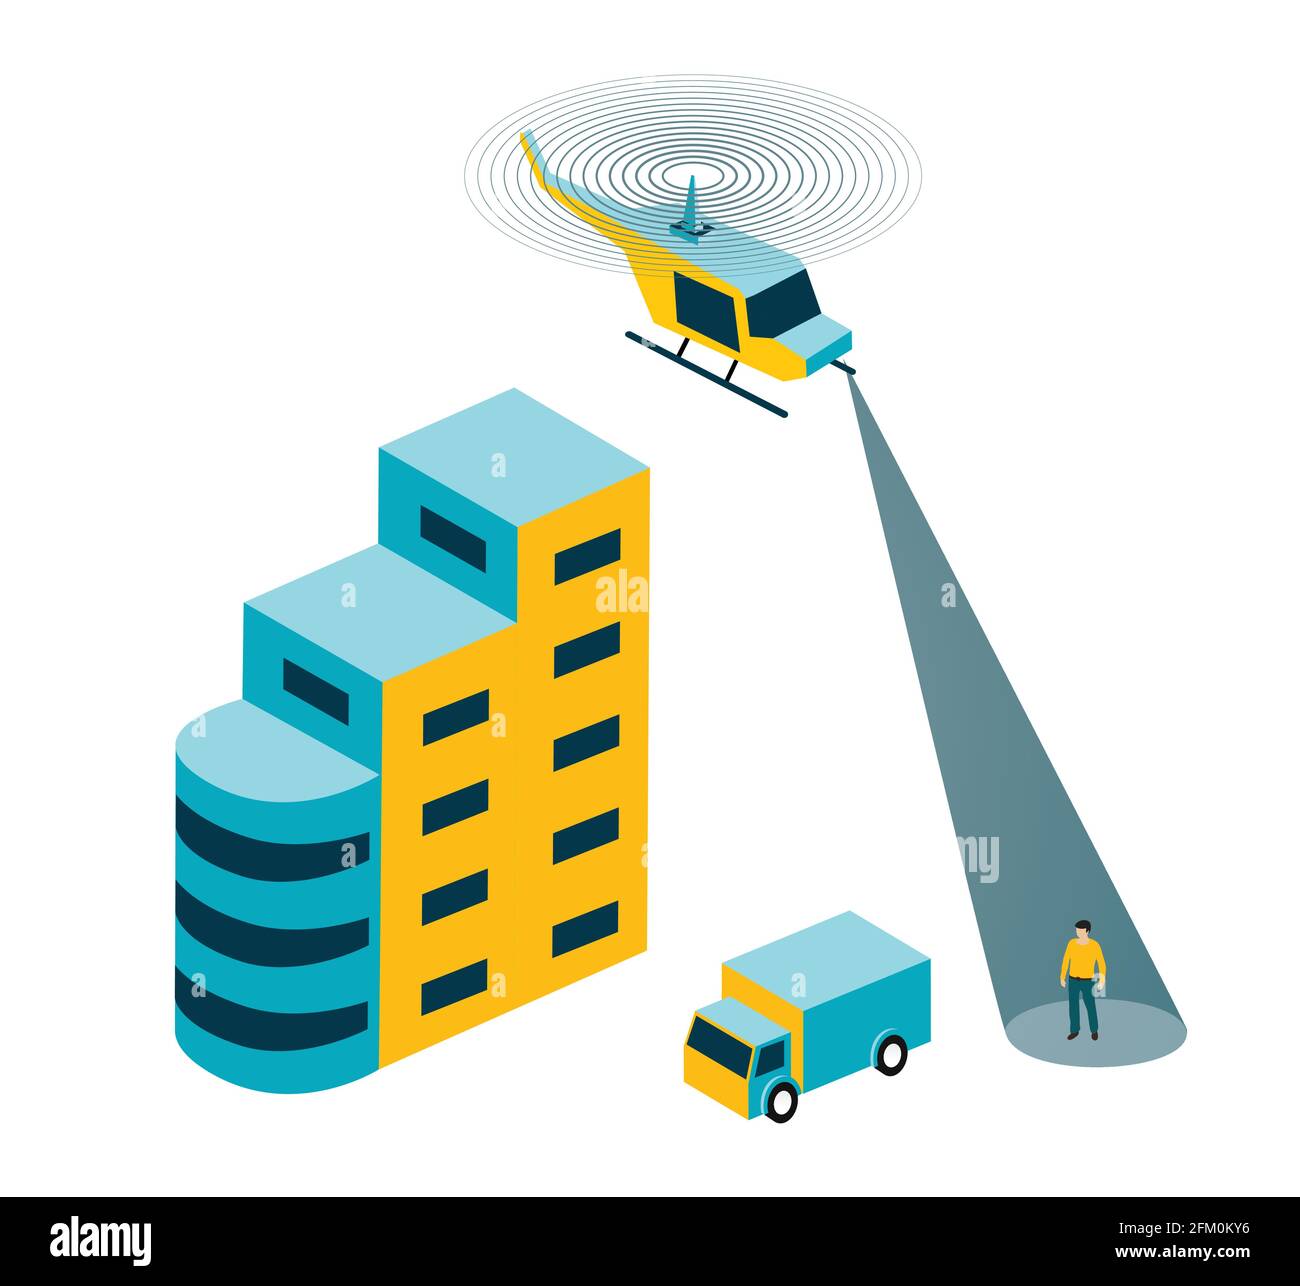 helicopter in isometric view with man and car Stock Vector